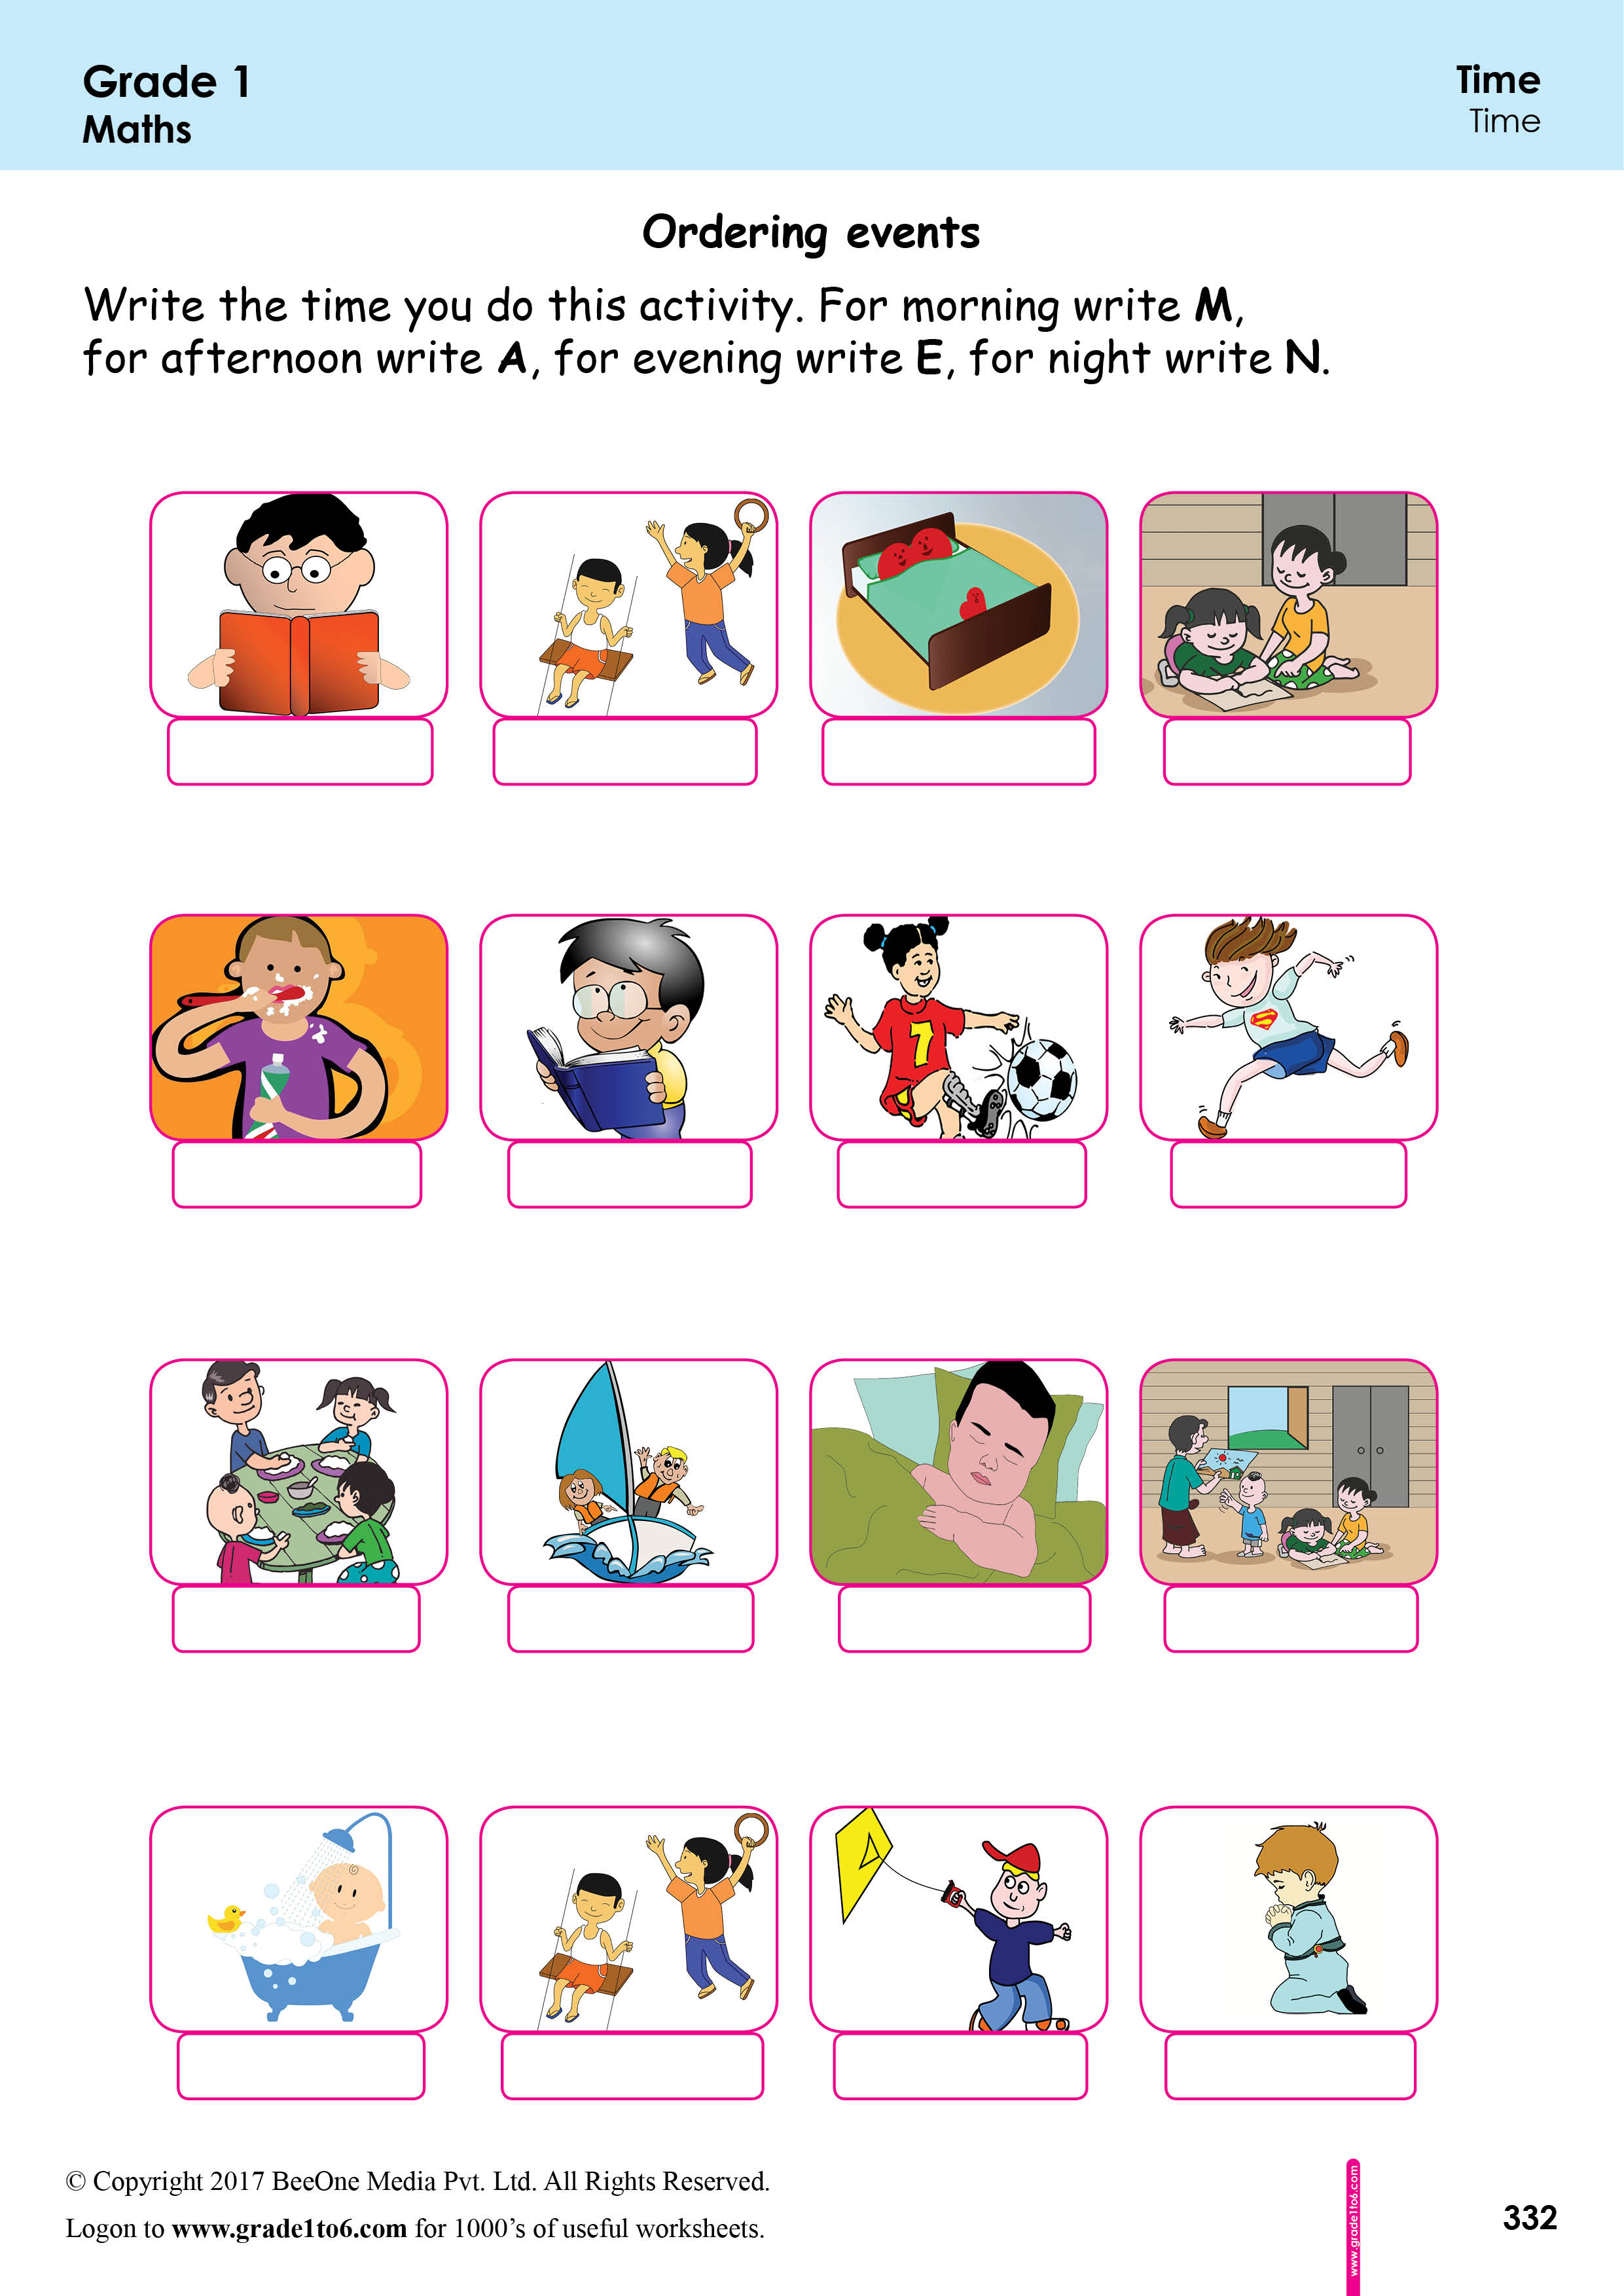 sequencing-events-based-on-time-worksheets-grade1to6